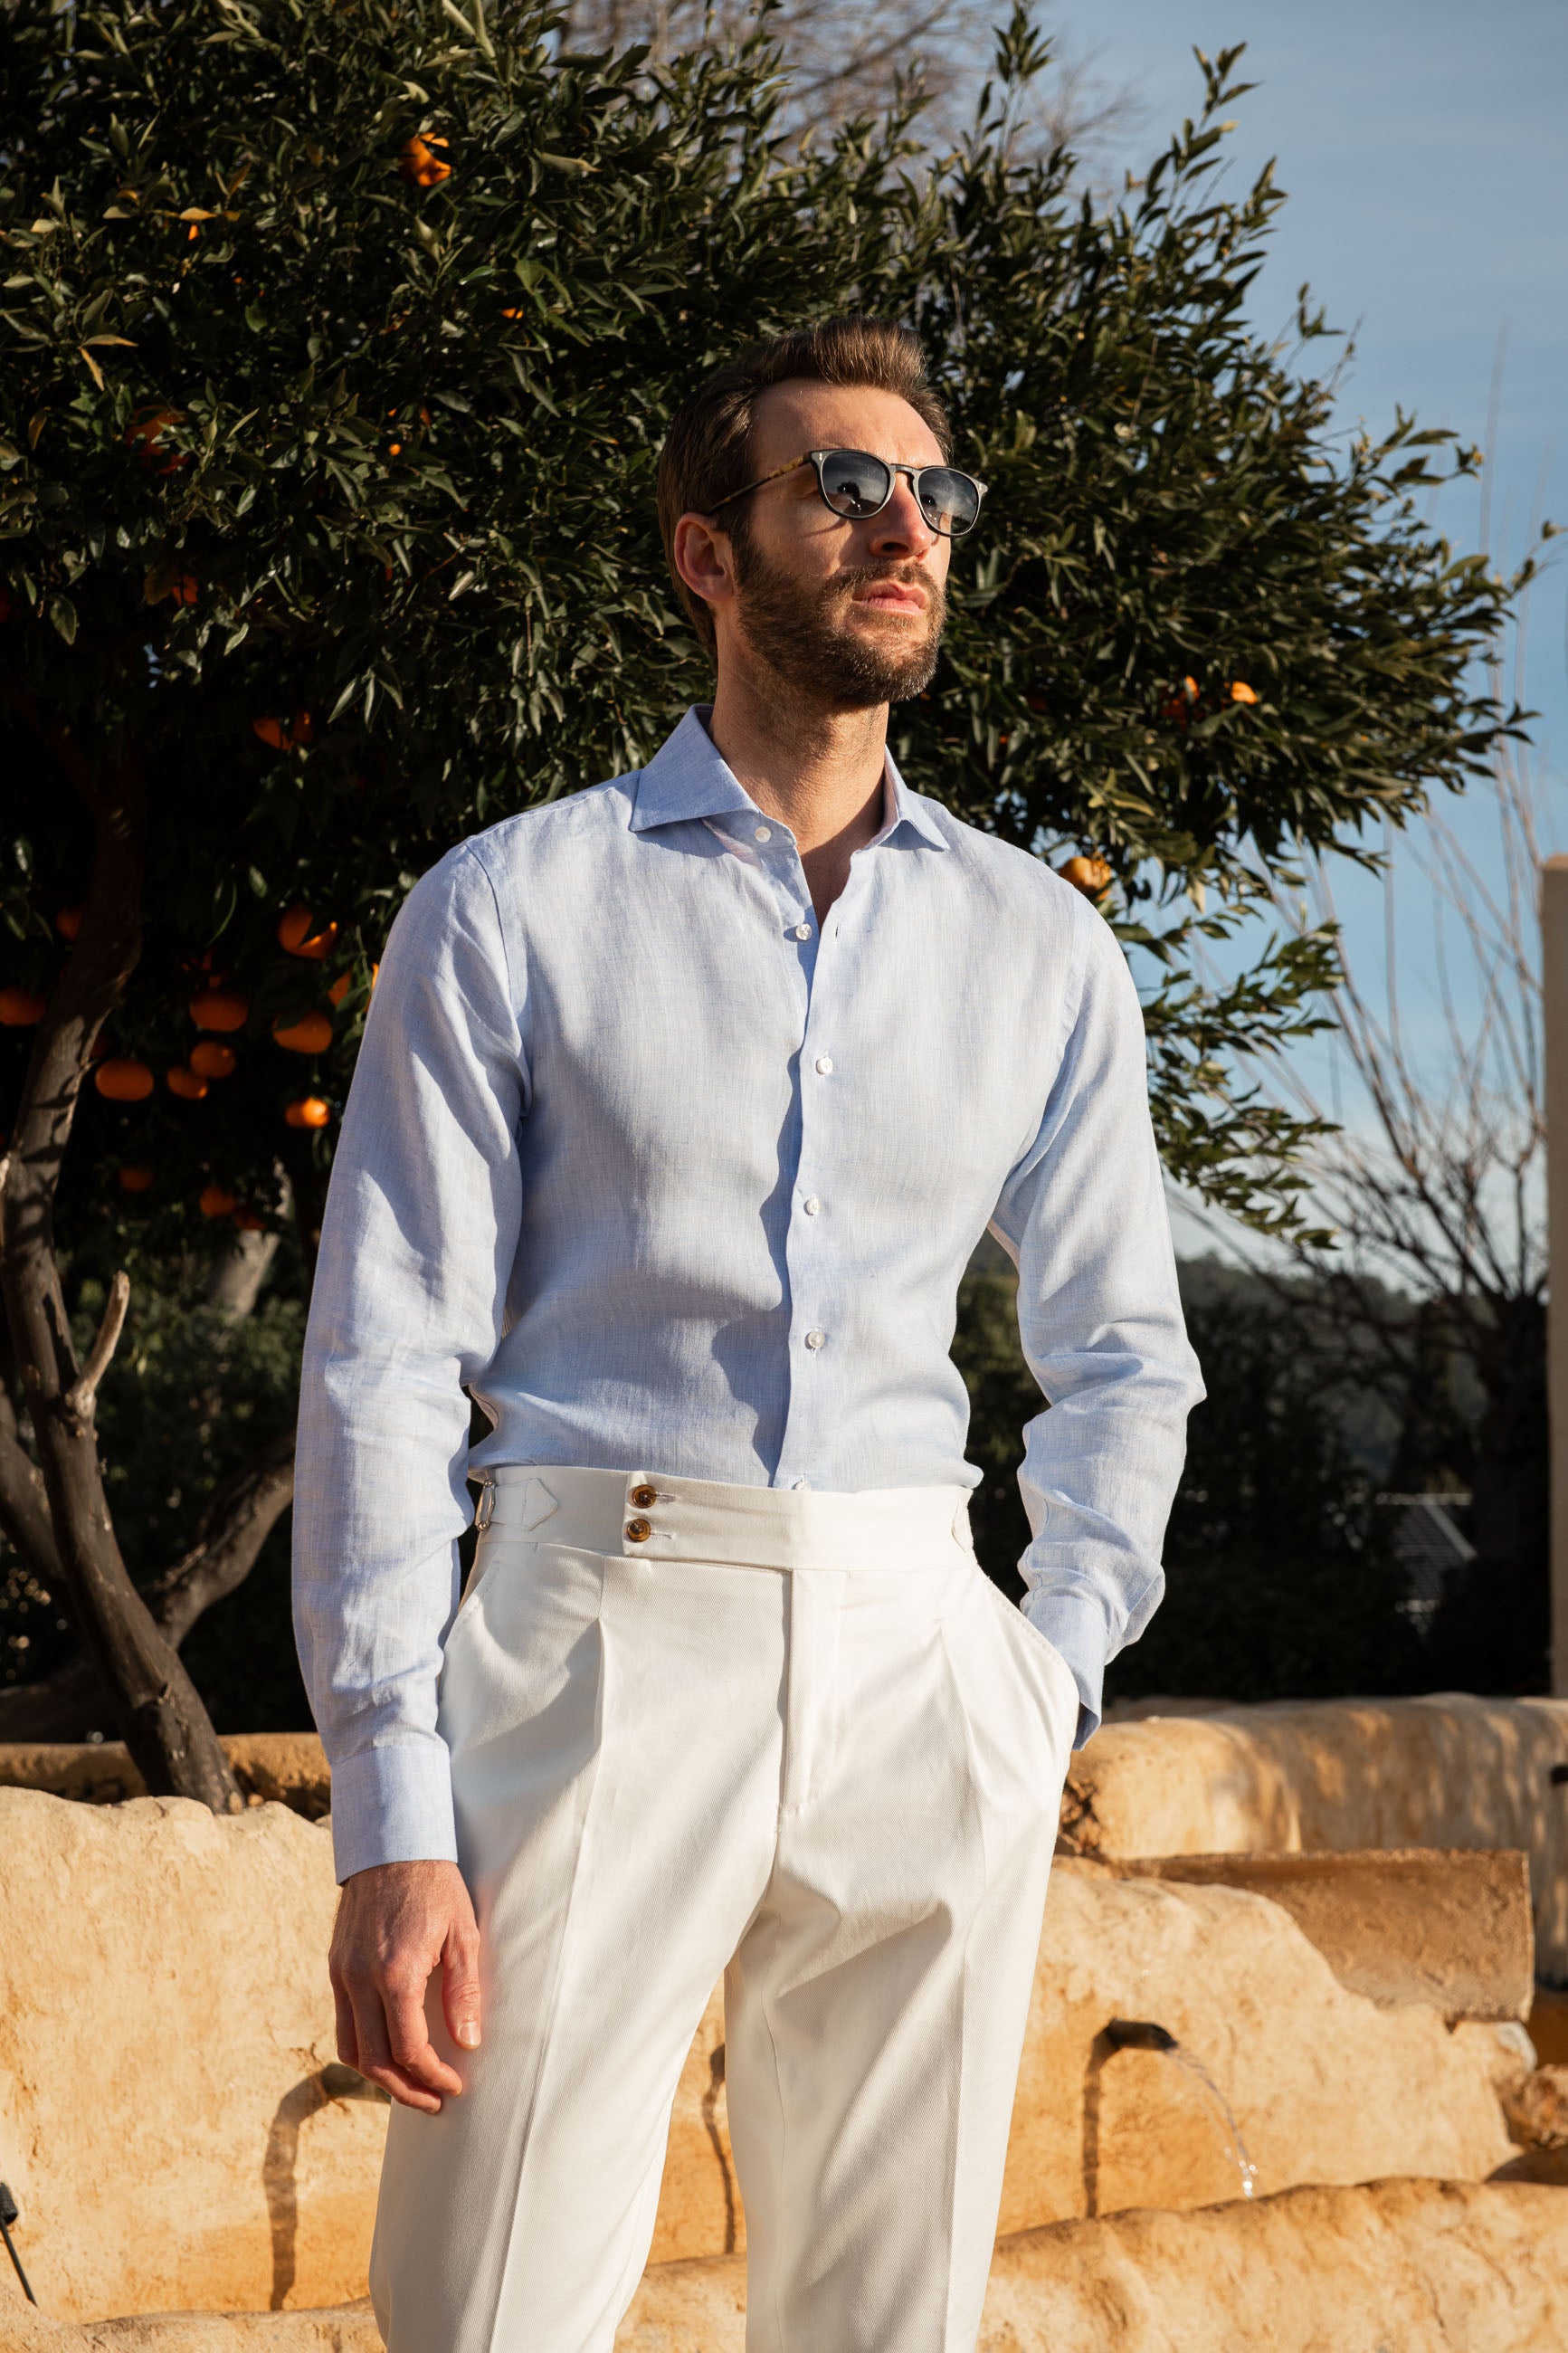 White Linea Uomo Clothing for Men for sale